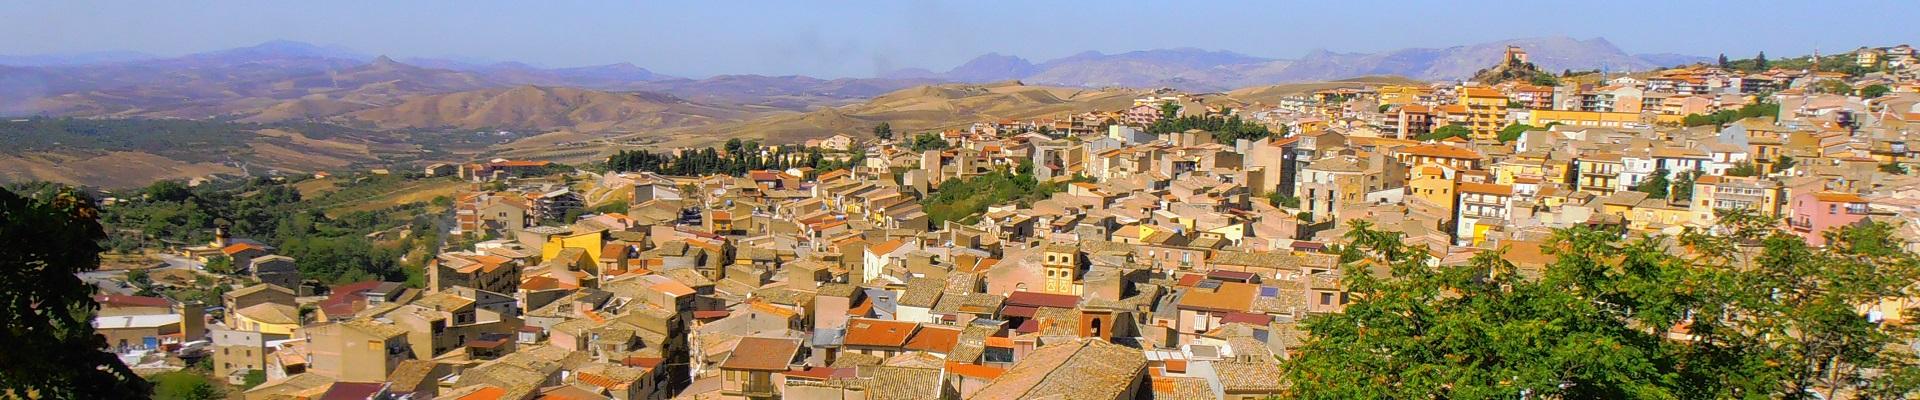 Villas in Sicily and holiday homes near Corleone